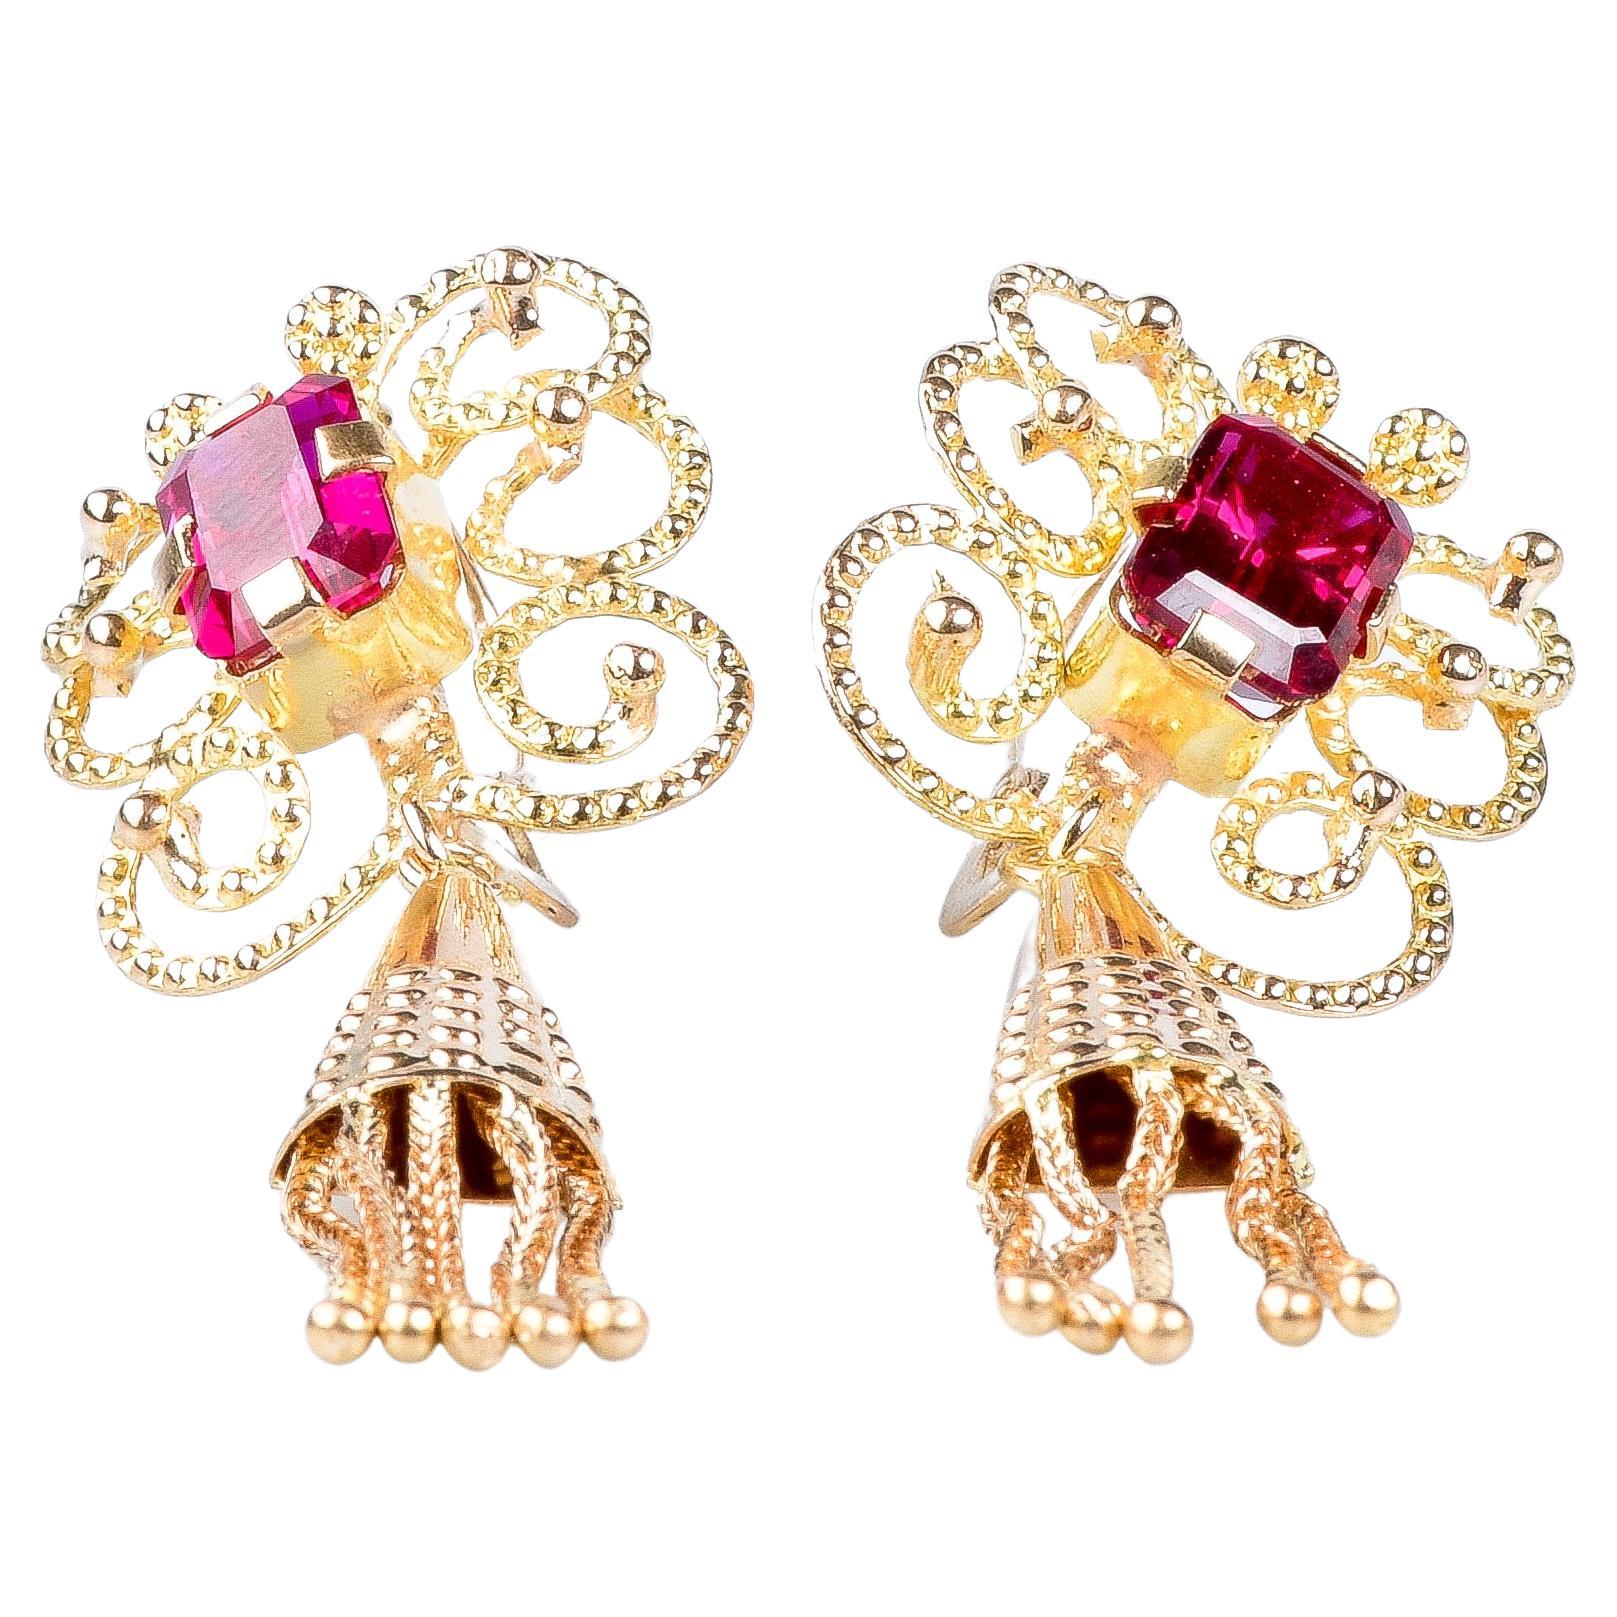 18 carat yellow gold earrings designed with 1.60 carat rubies